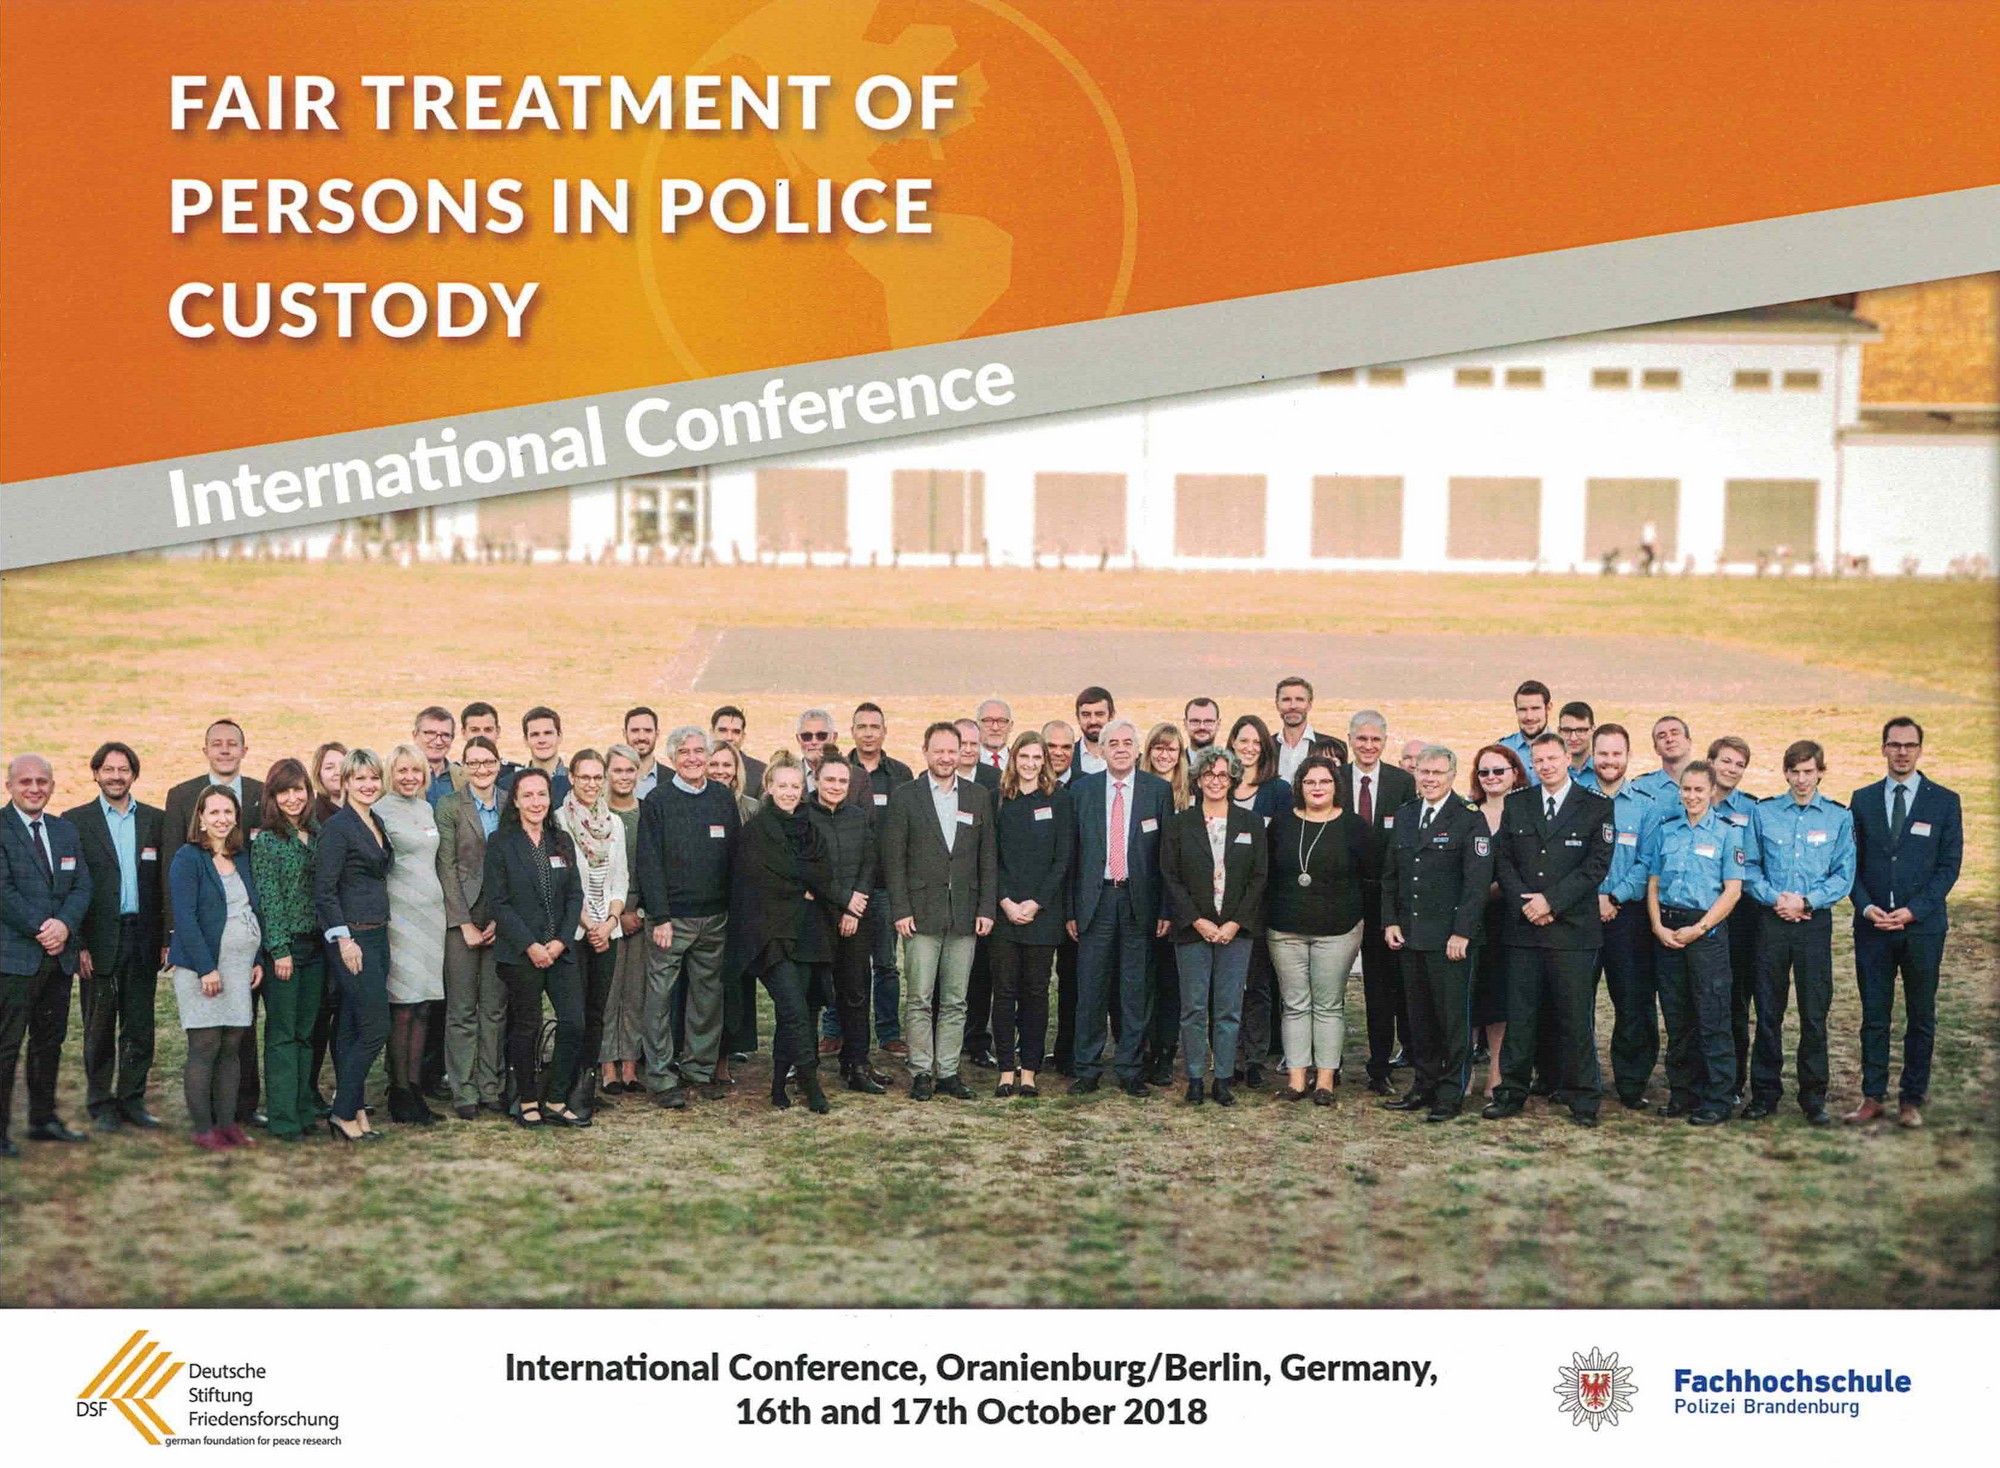 Valeriia Rybak participated in The International Conference on FAIR TREATMENT OF PERSONS IN POLICE CUSTODY